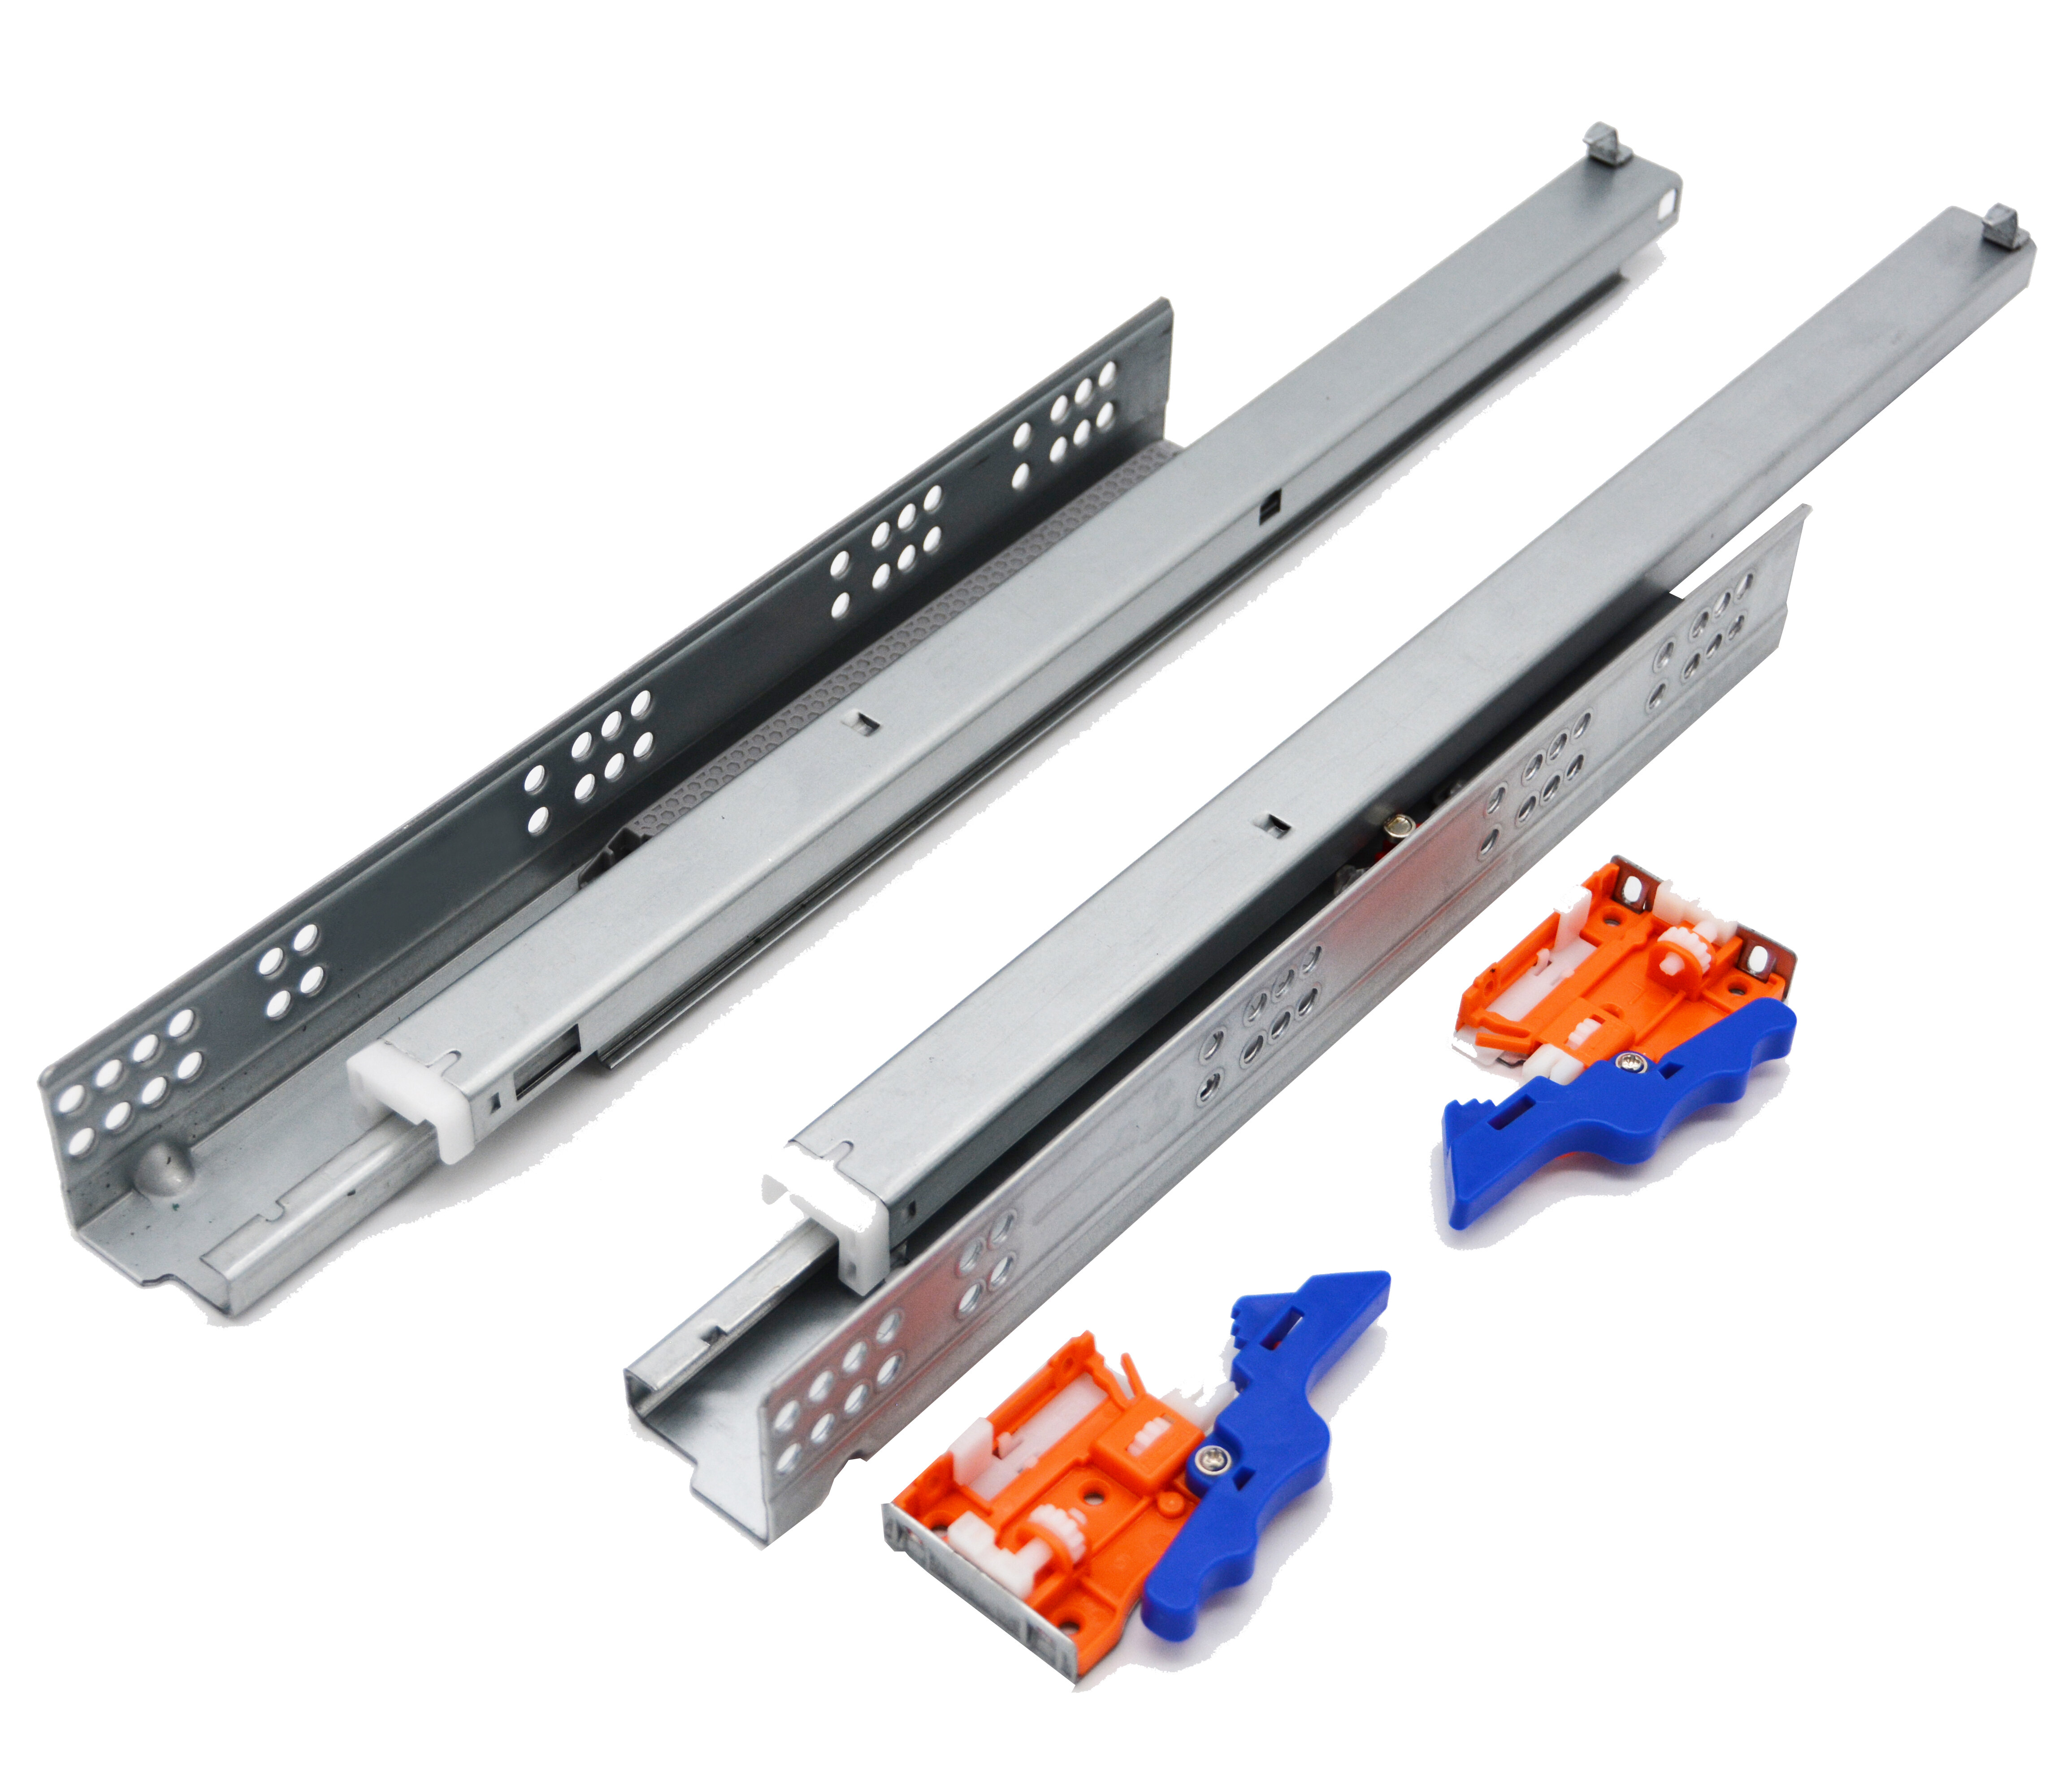 Silent The Three-Section Drawer Track Improves The Drawer Space Utilization. Smoother Drawing Drawer Slides Bounce Rails Solid Carbon Steel Balls 